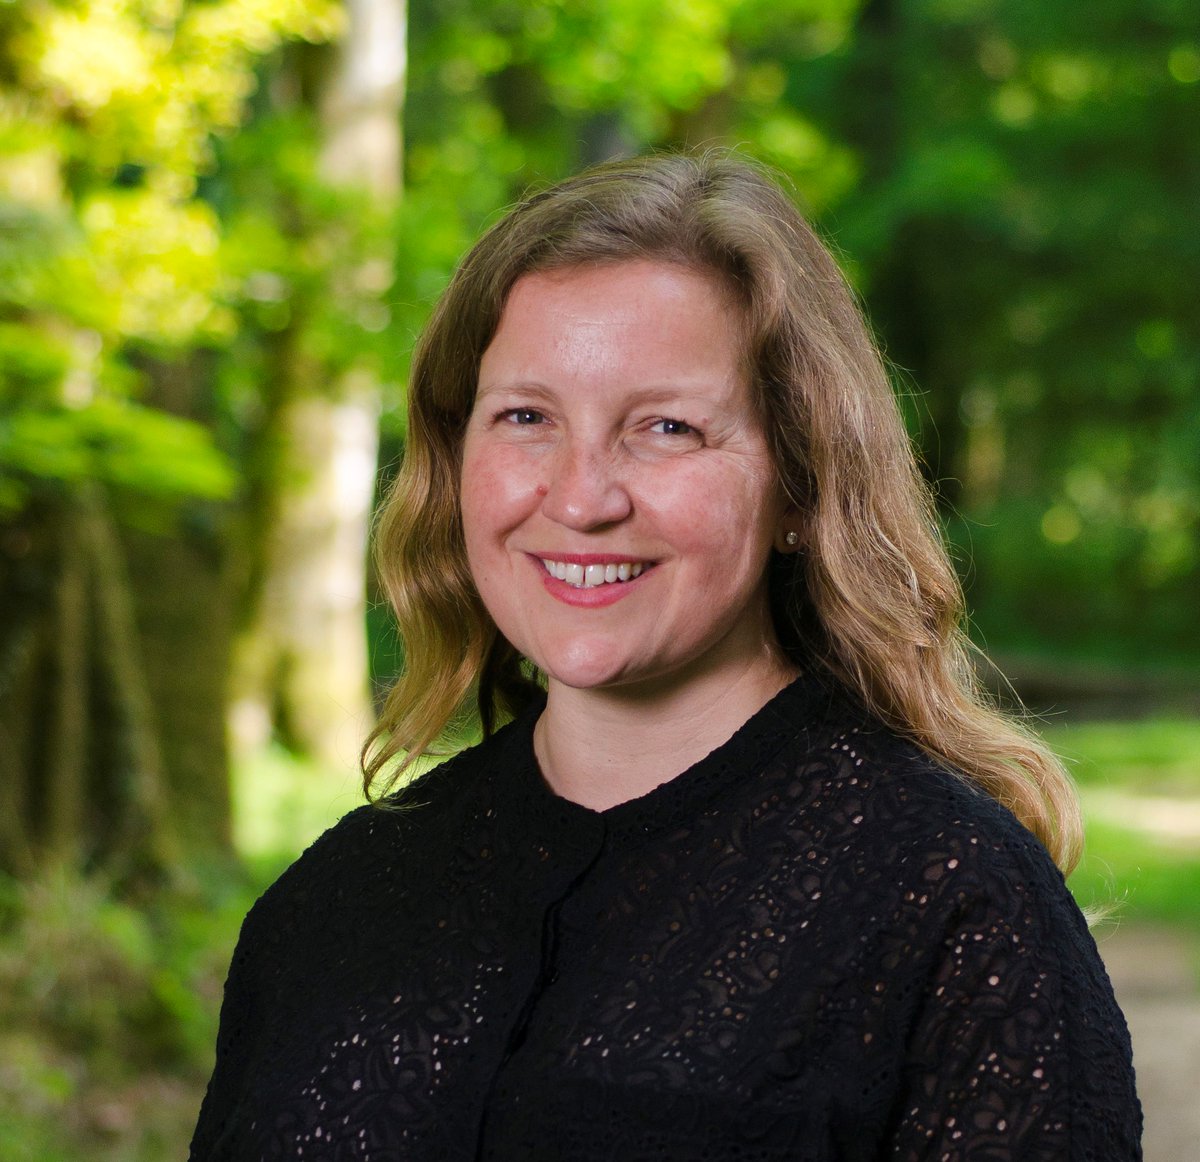 To celebrate #InternationalWomen’sDay on Friday, join the virtual chat: Women’s Leadership in Protected Landscapes – led by our CEO Alison Barnes. Do join the conversation! Fri 8 March 10-11.30am Book your FREE place at eventbrite.co.uk/e/womens-leade… #NewForest #NationalParks